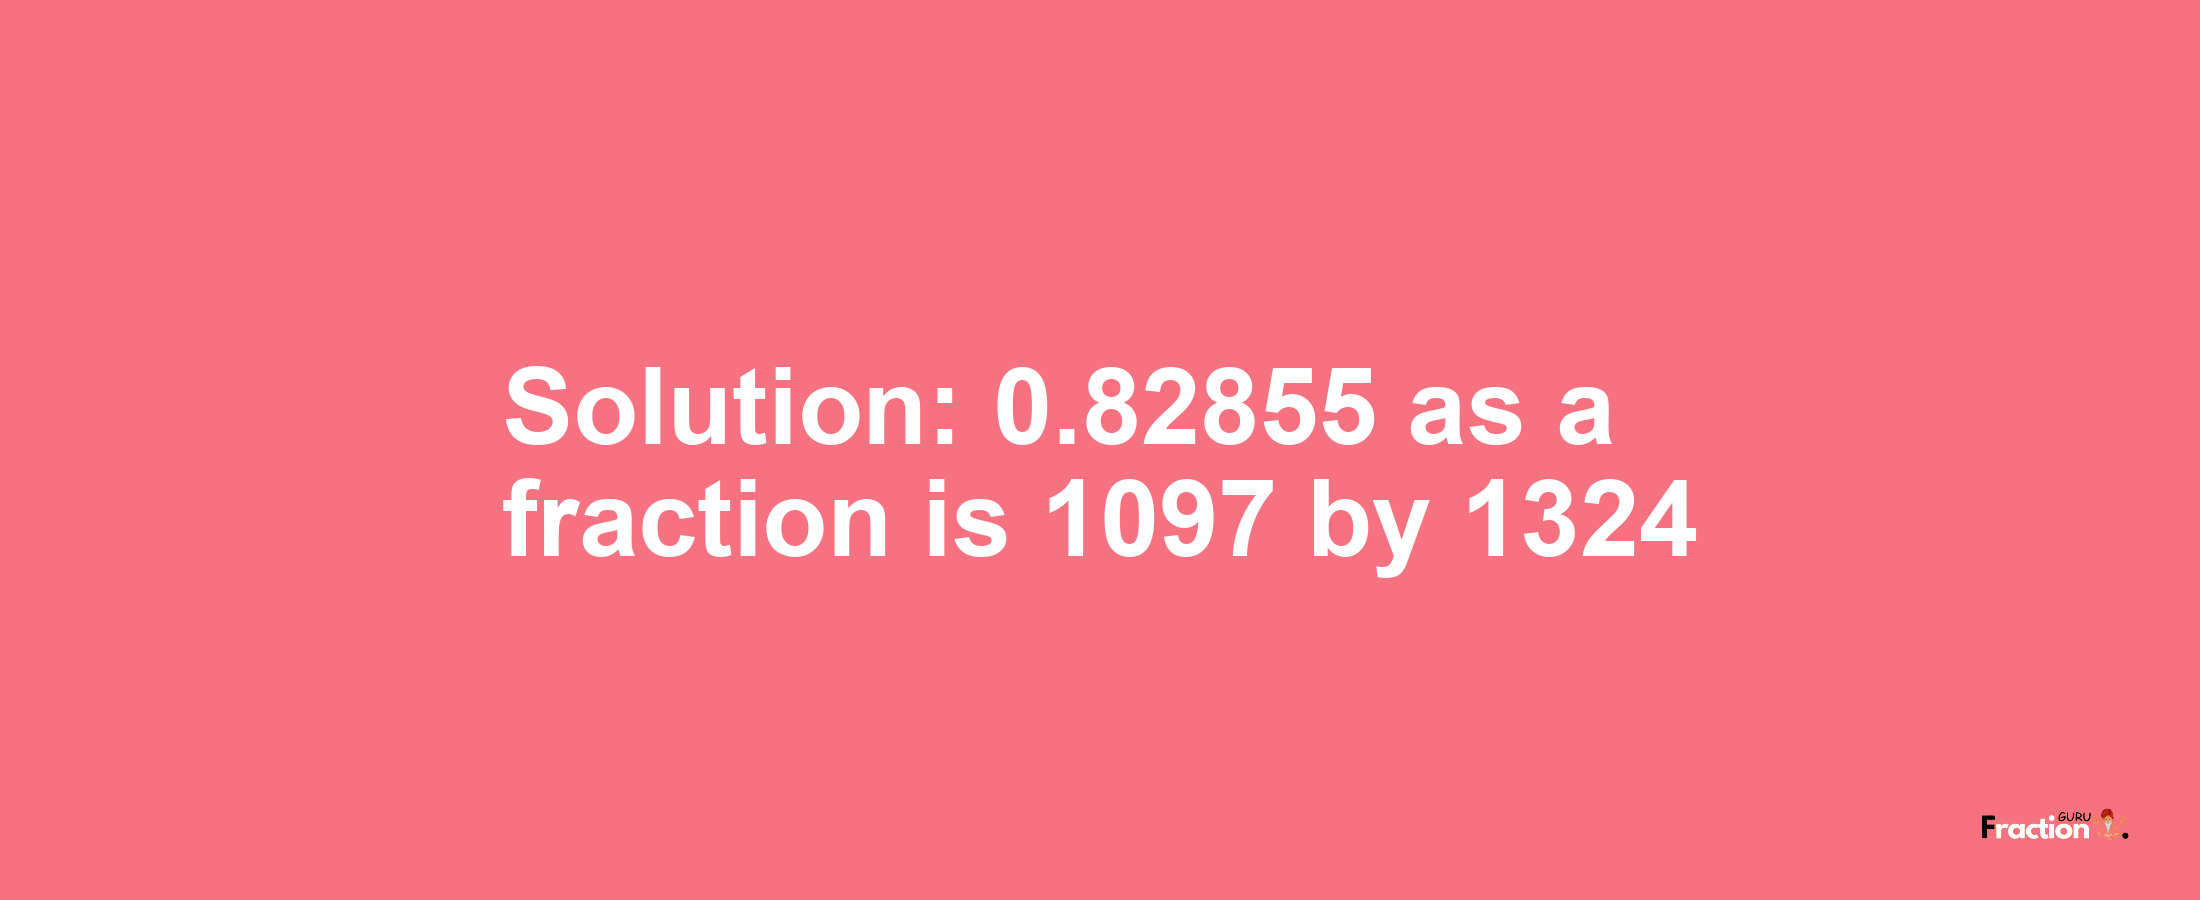 Solution:0.82855 as a fraction is 1097/1324